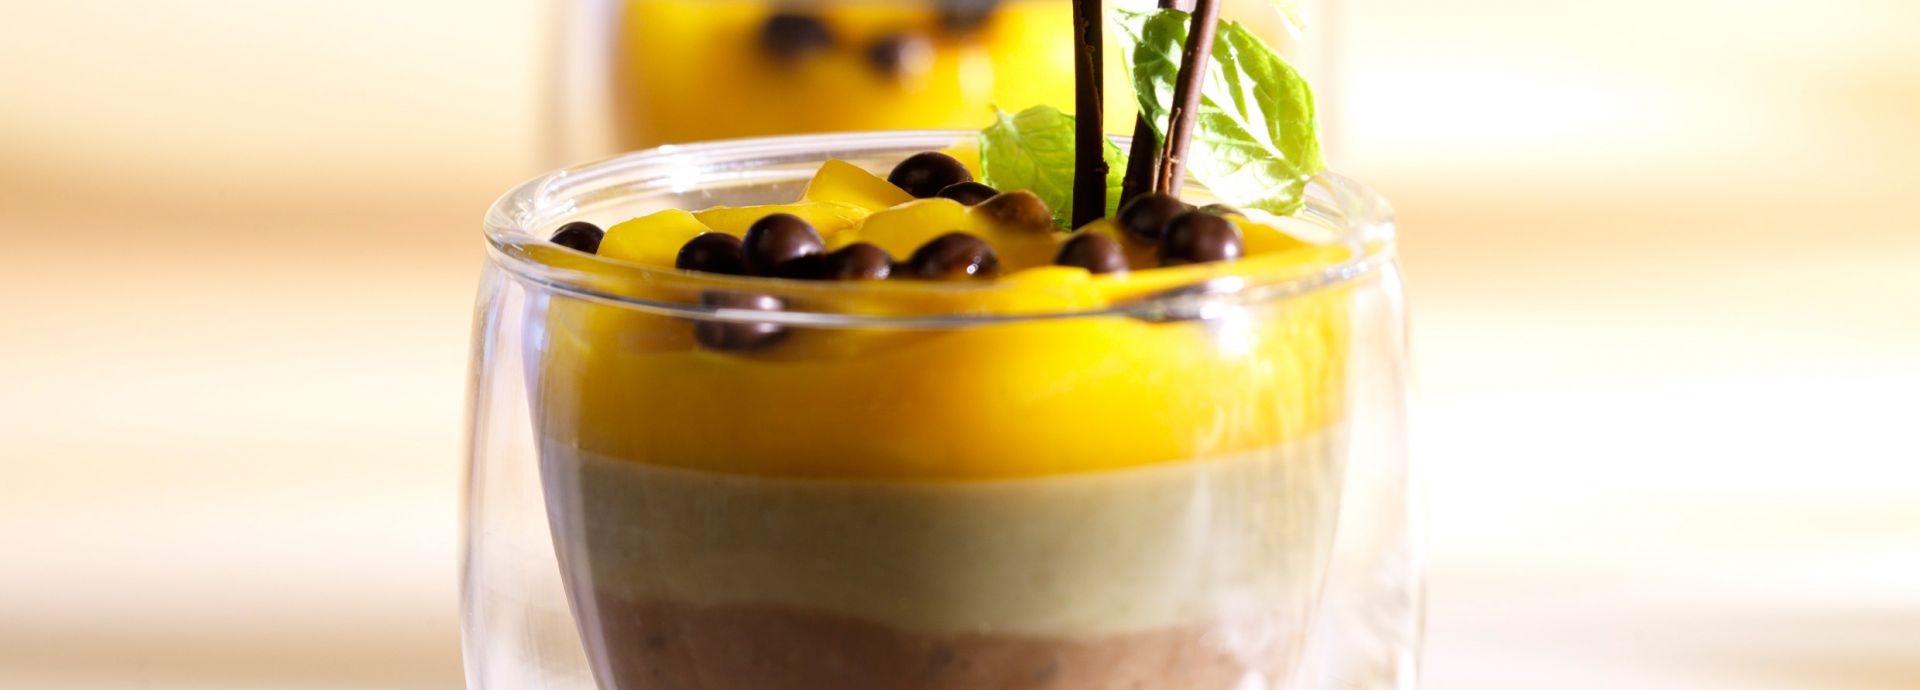 Recipe parts - Mango and chocolate summer delight